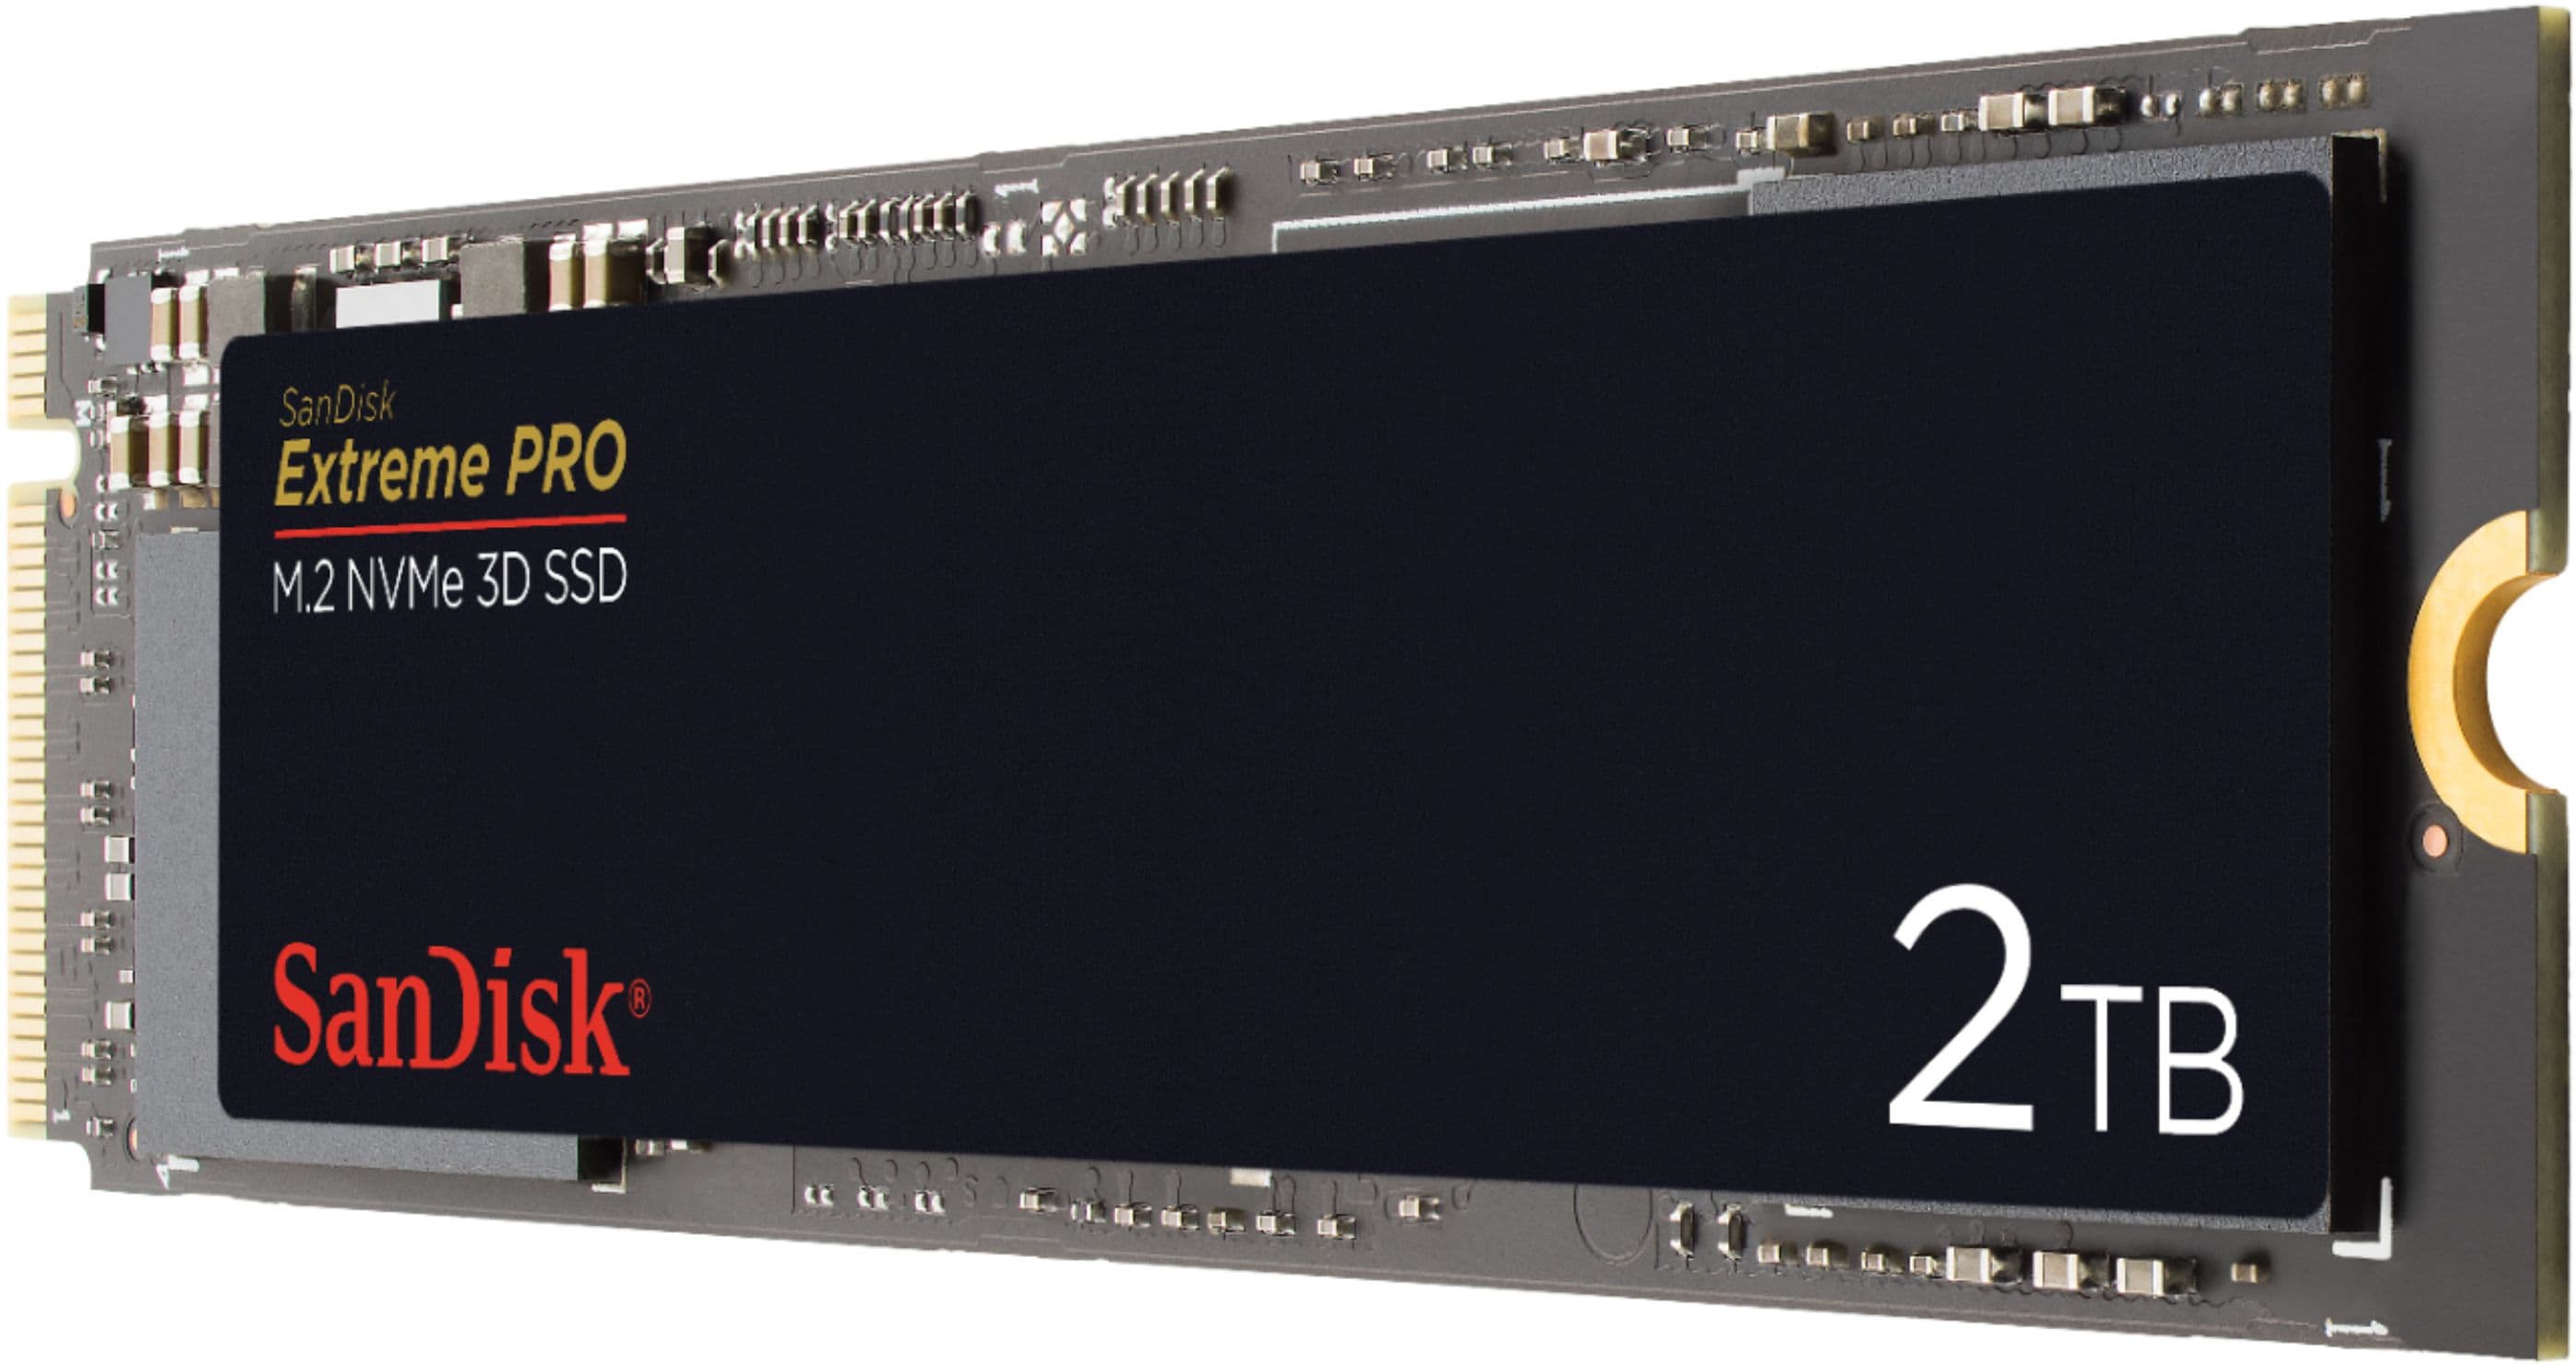 SanDisk Extreme PRO 2TB M.2 PCIe 3.0 NVMe Solid State Drive $179.99 + Free Shipping Best Buy